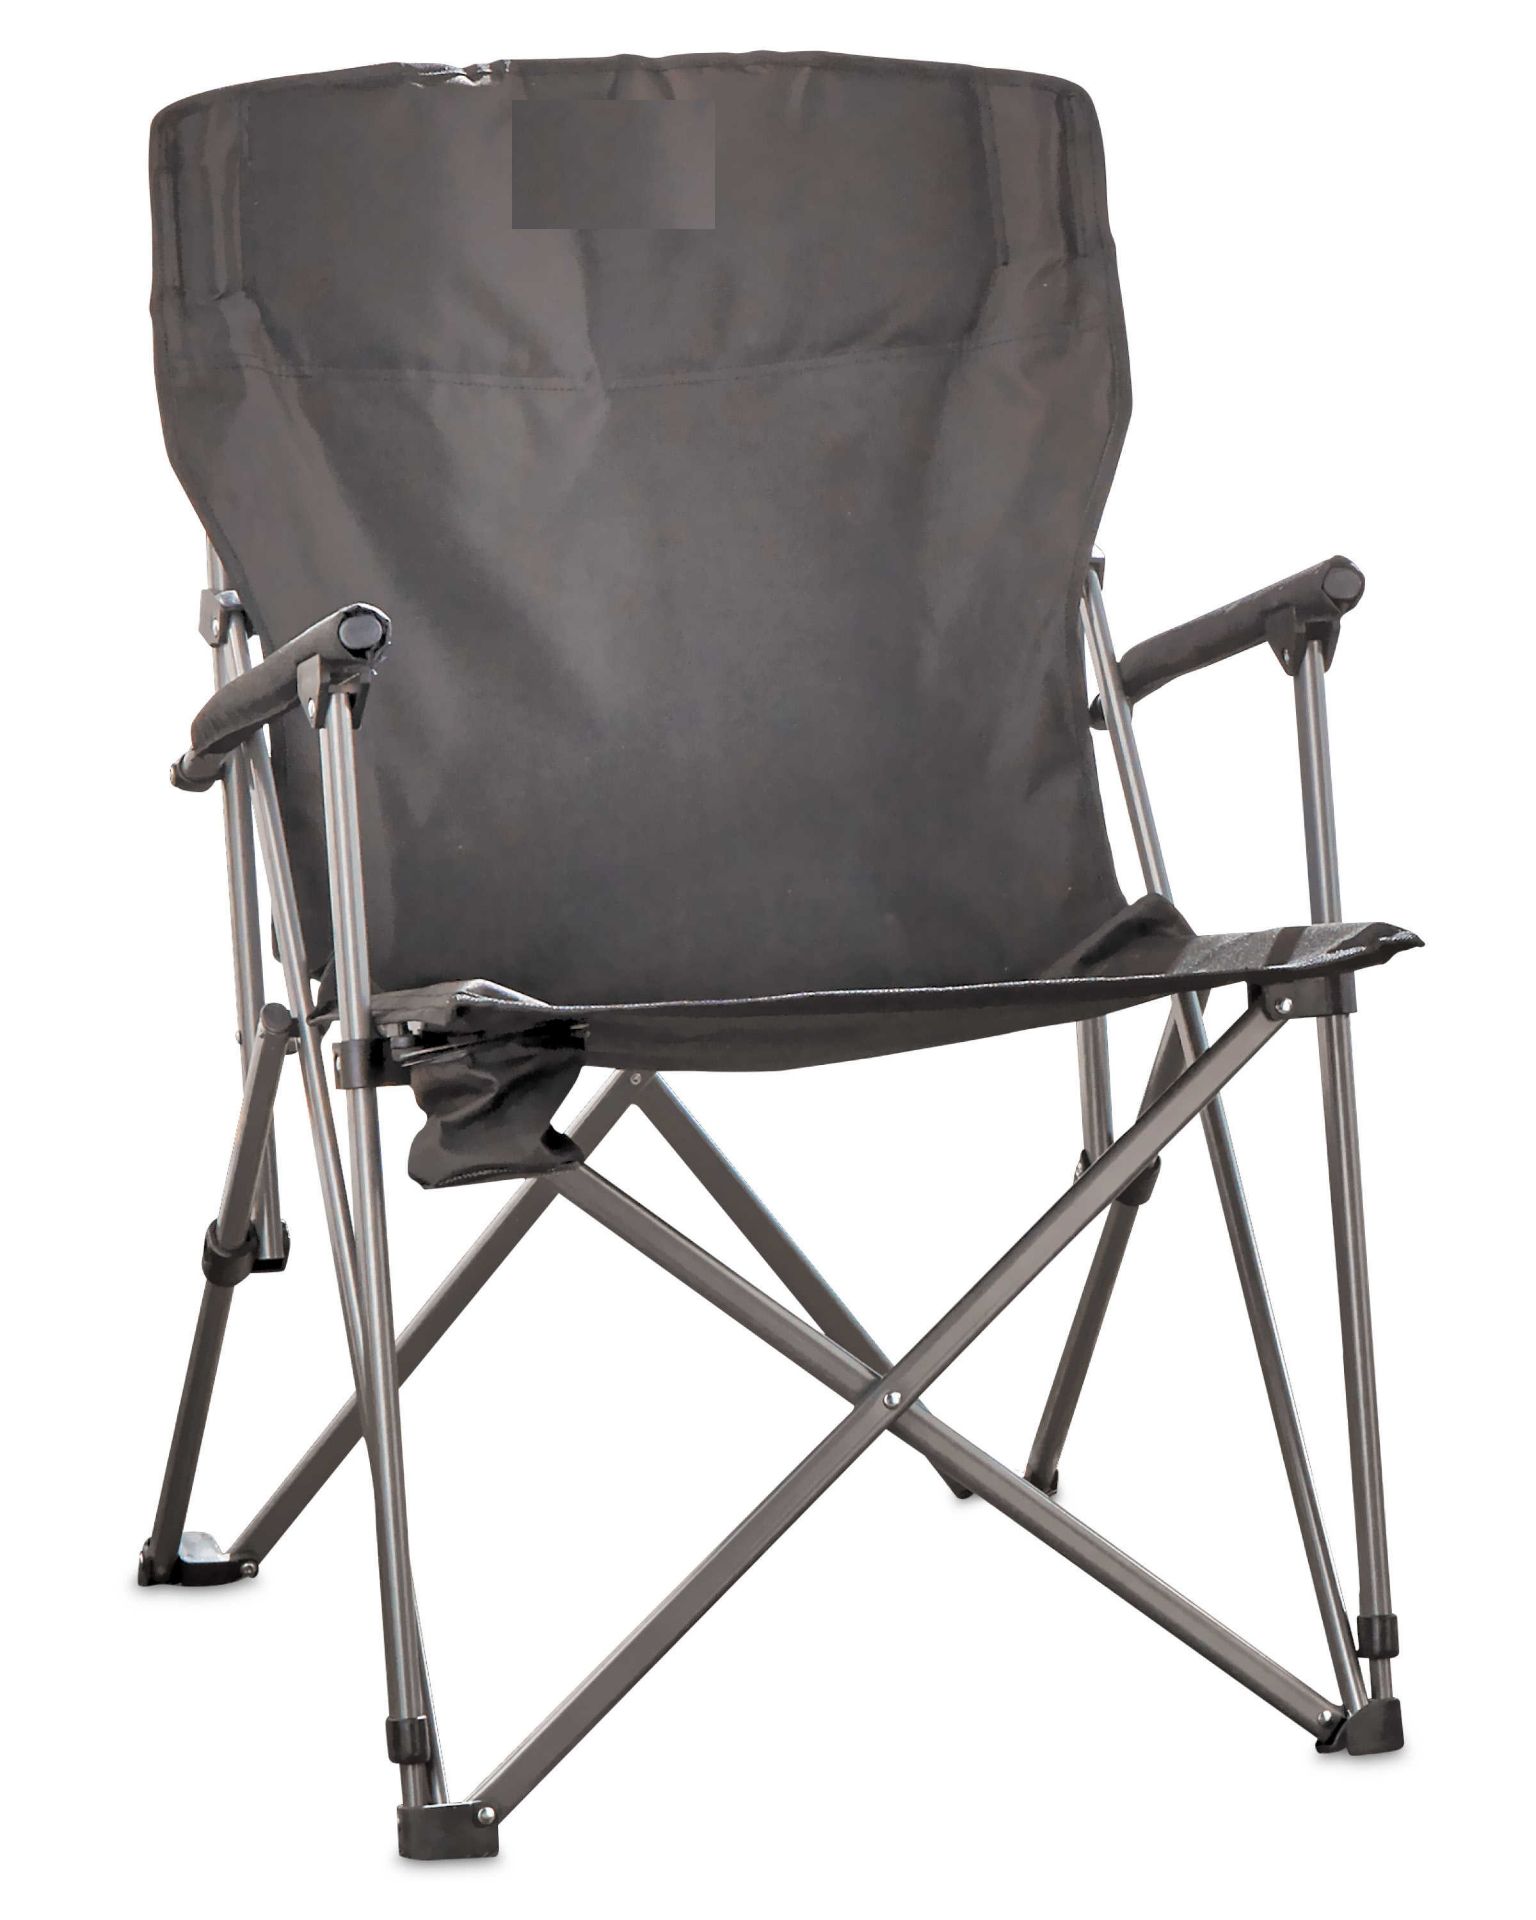 V *TRADE QTY* Brand New Expedition/Tourer Chair In Silver/Black With Carry Case - Lightweight - Image 2 of 2